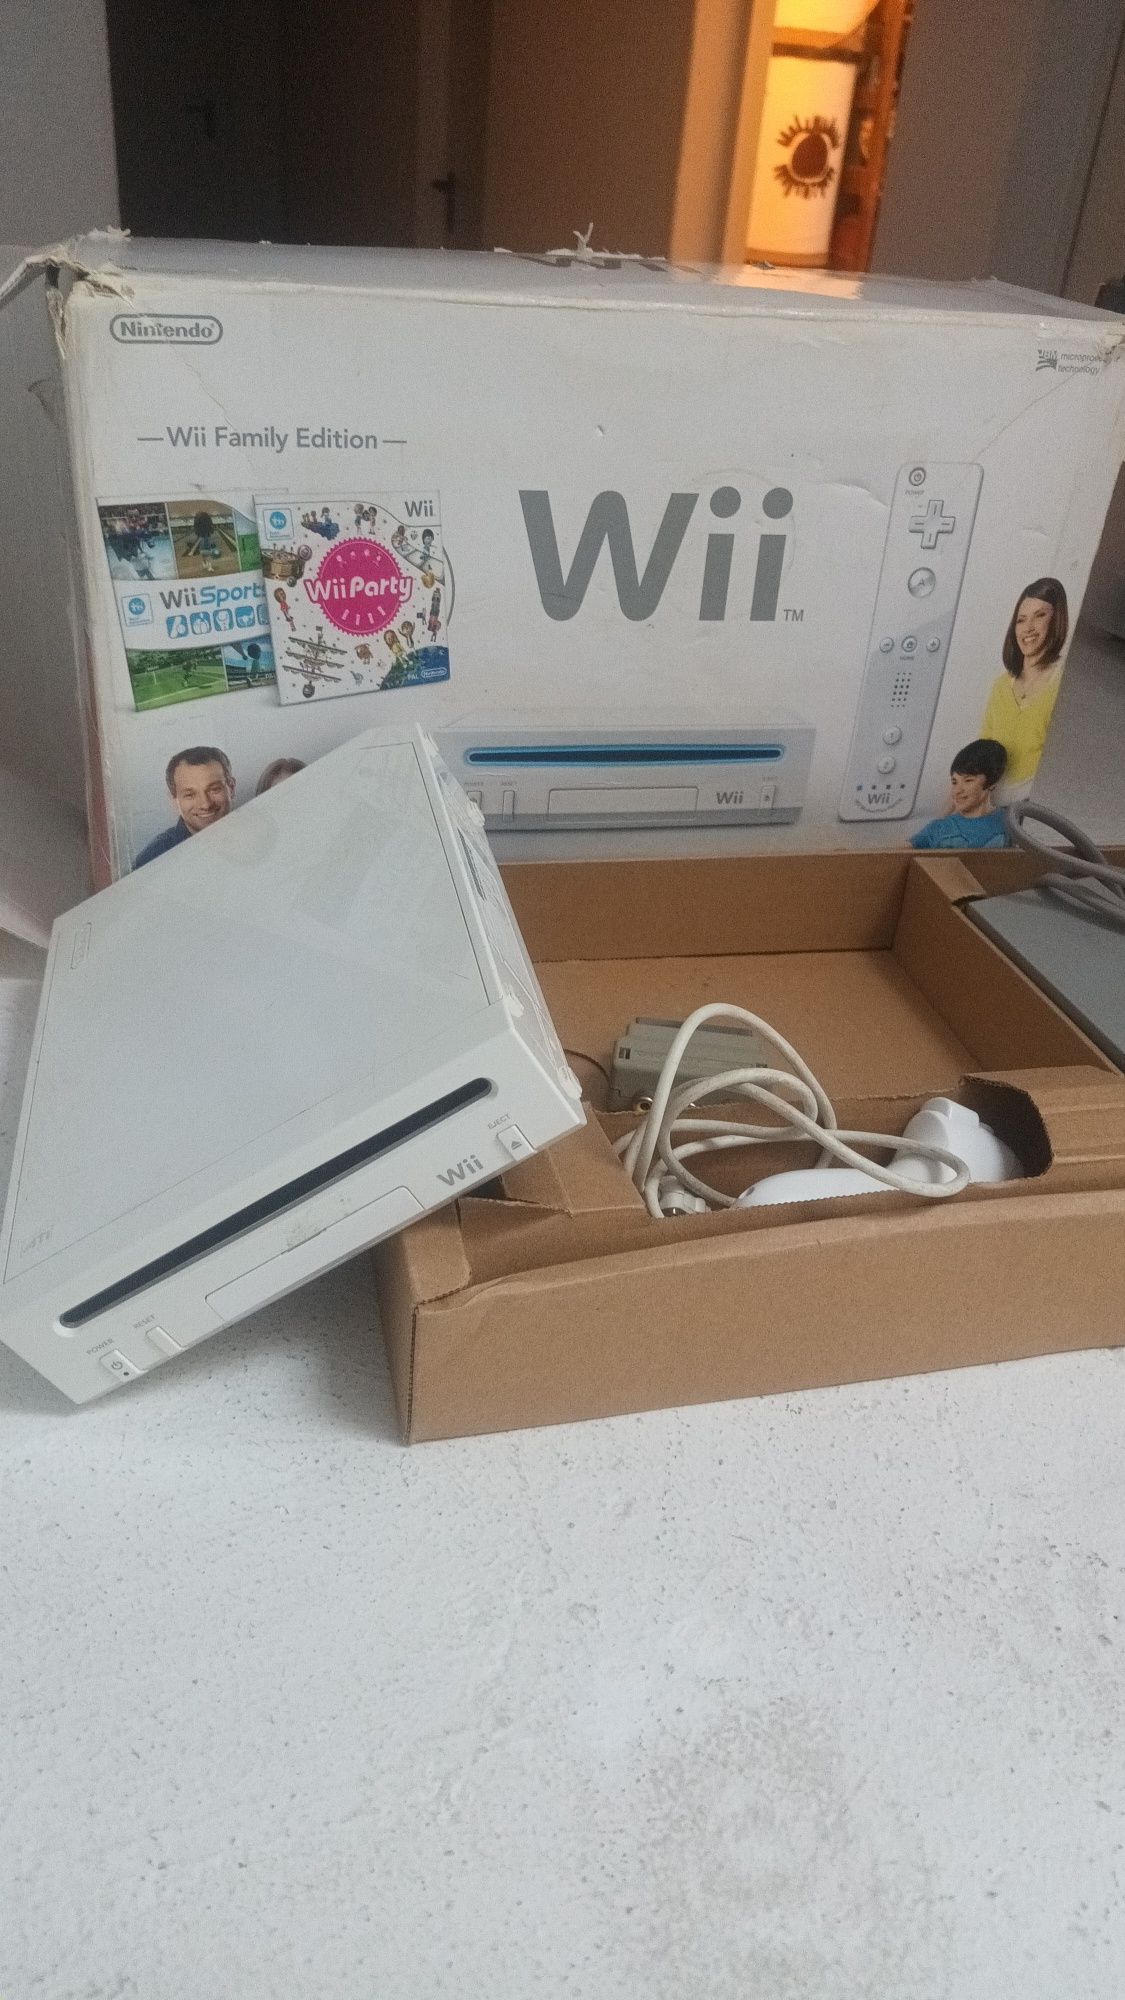 Wii Family completa